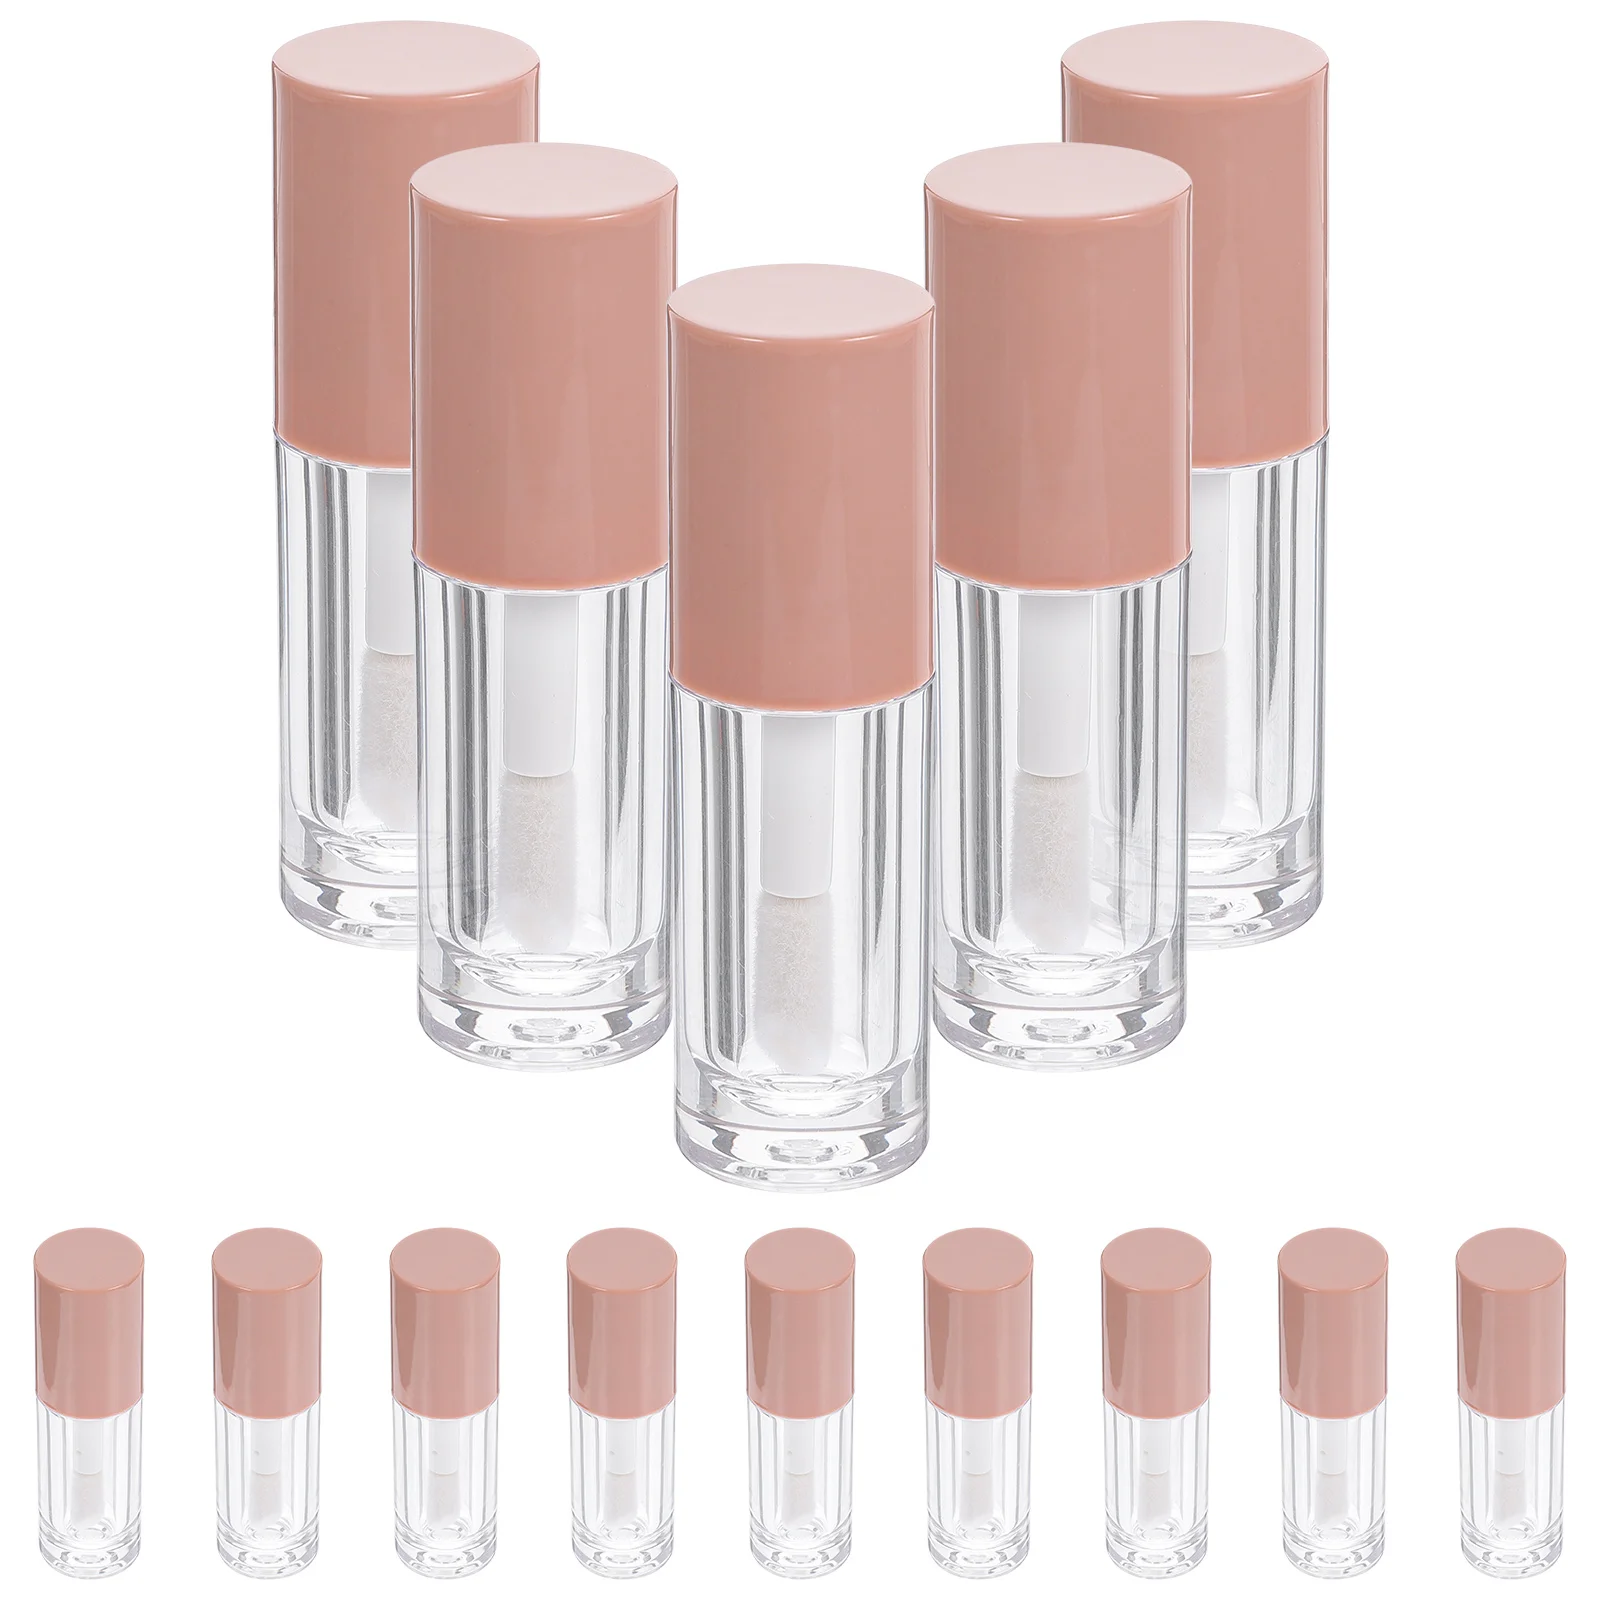 

14 pcs Clear Lip Gloss Tubes Plastic Lip Gloss Containers Empty Lip Gloss Container with Wands